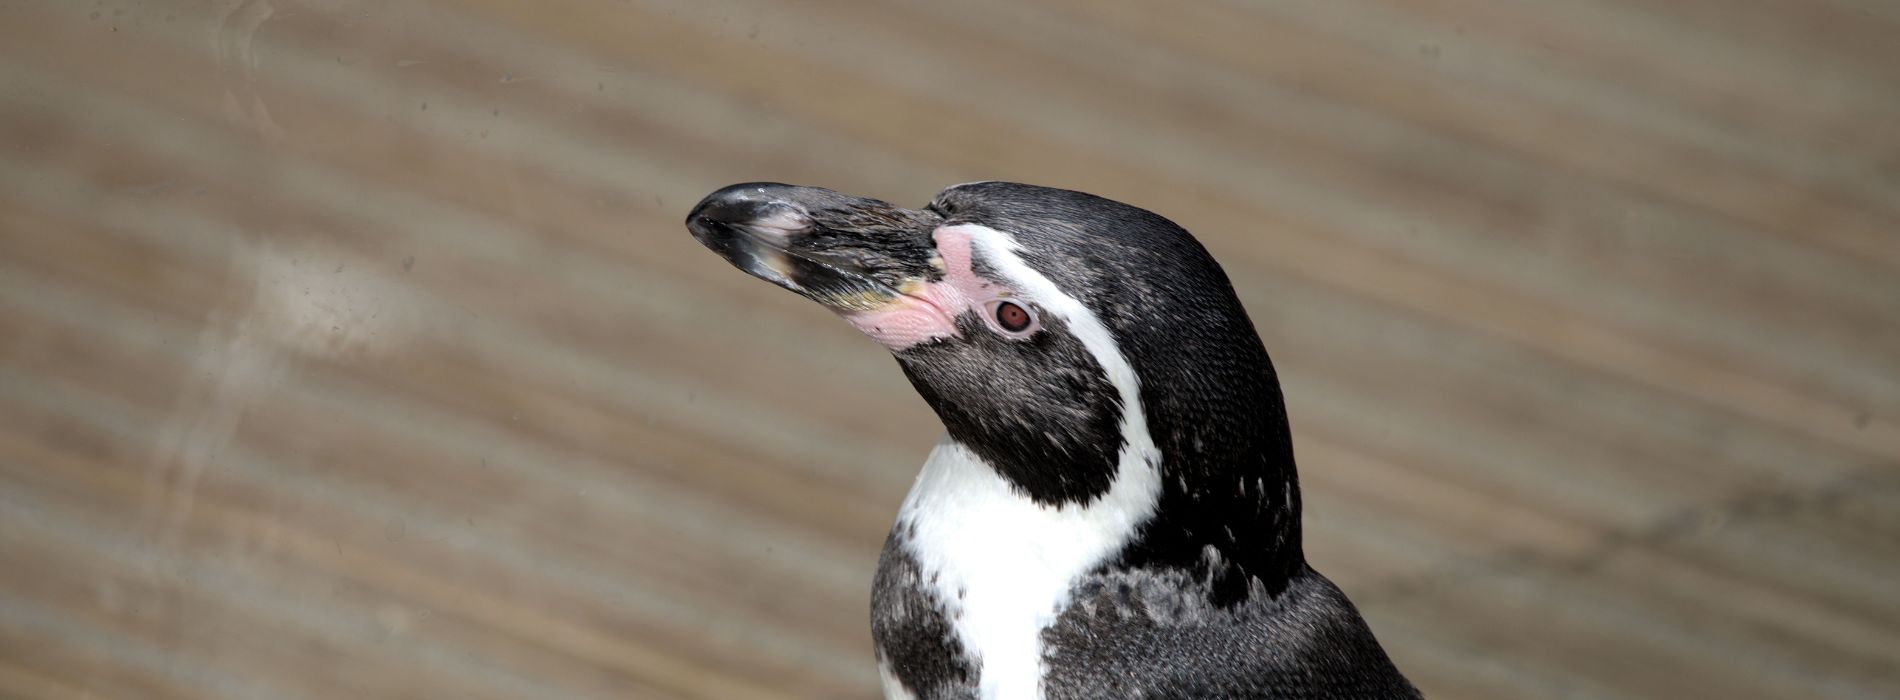 What is the IQ of a penguin?